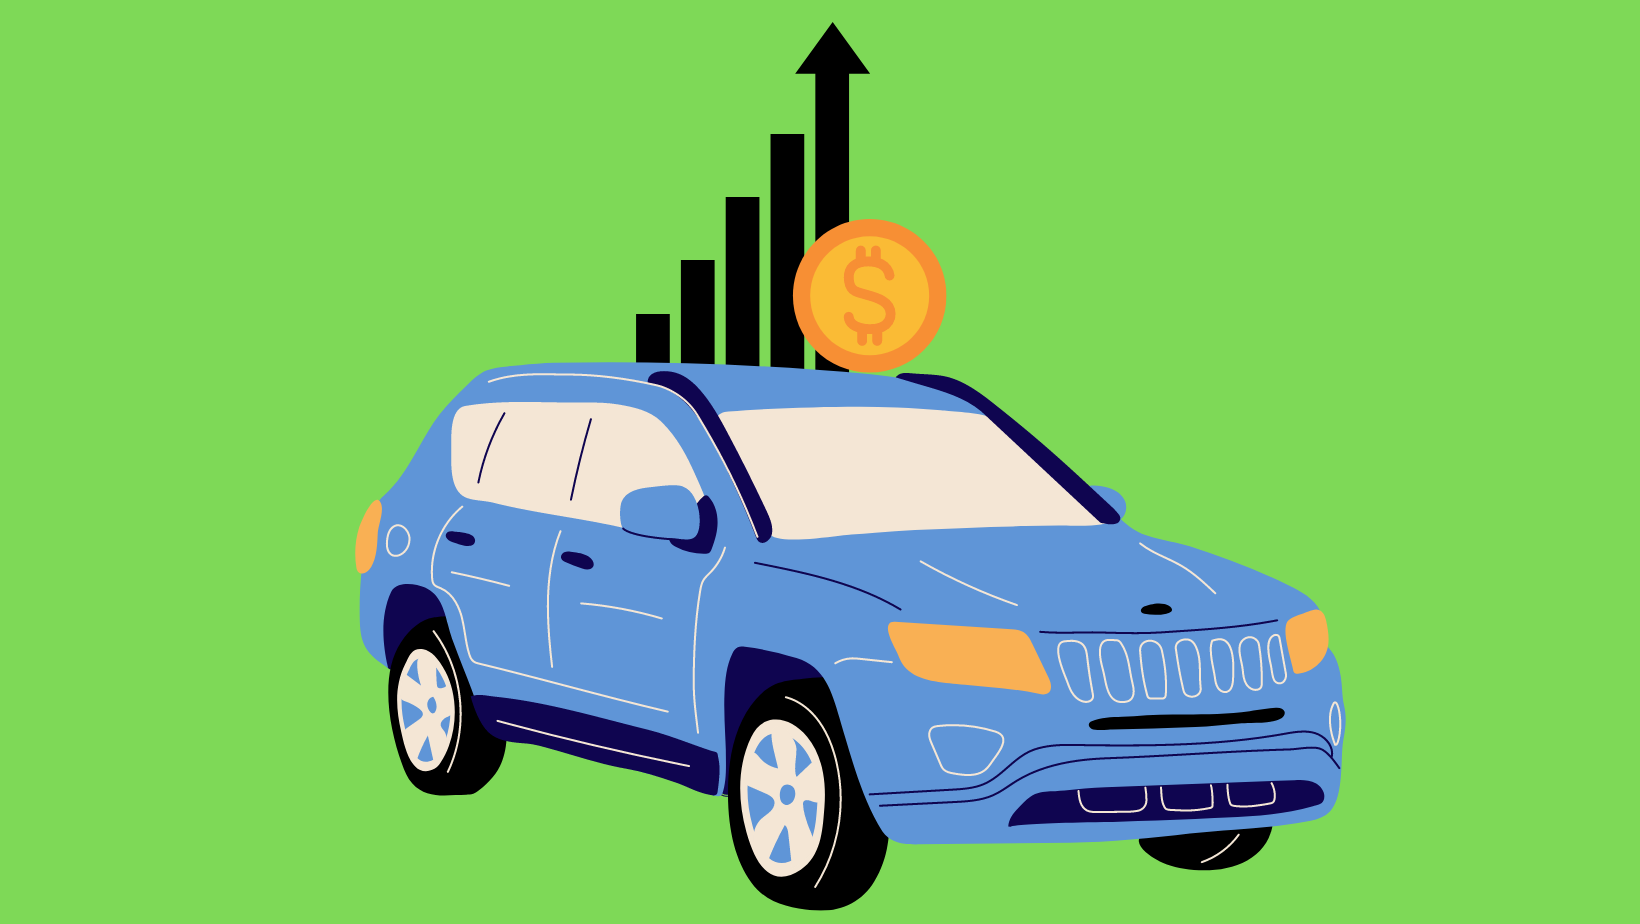 A blue car against a green background with a graph trending upwards behind it with a large coin in front of the graph.